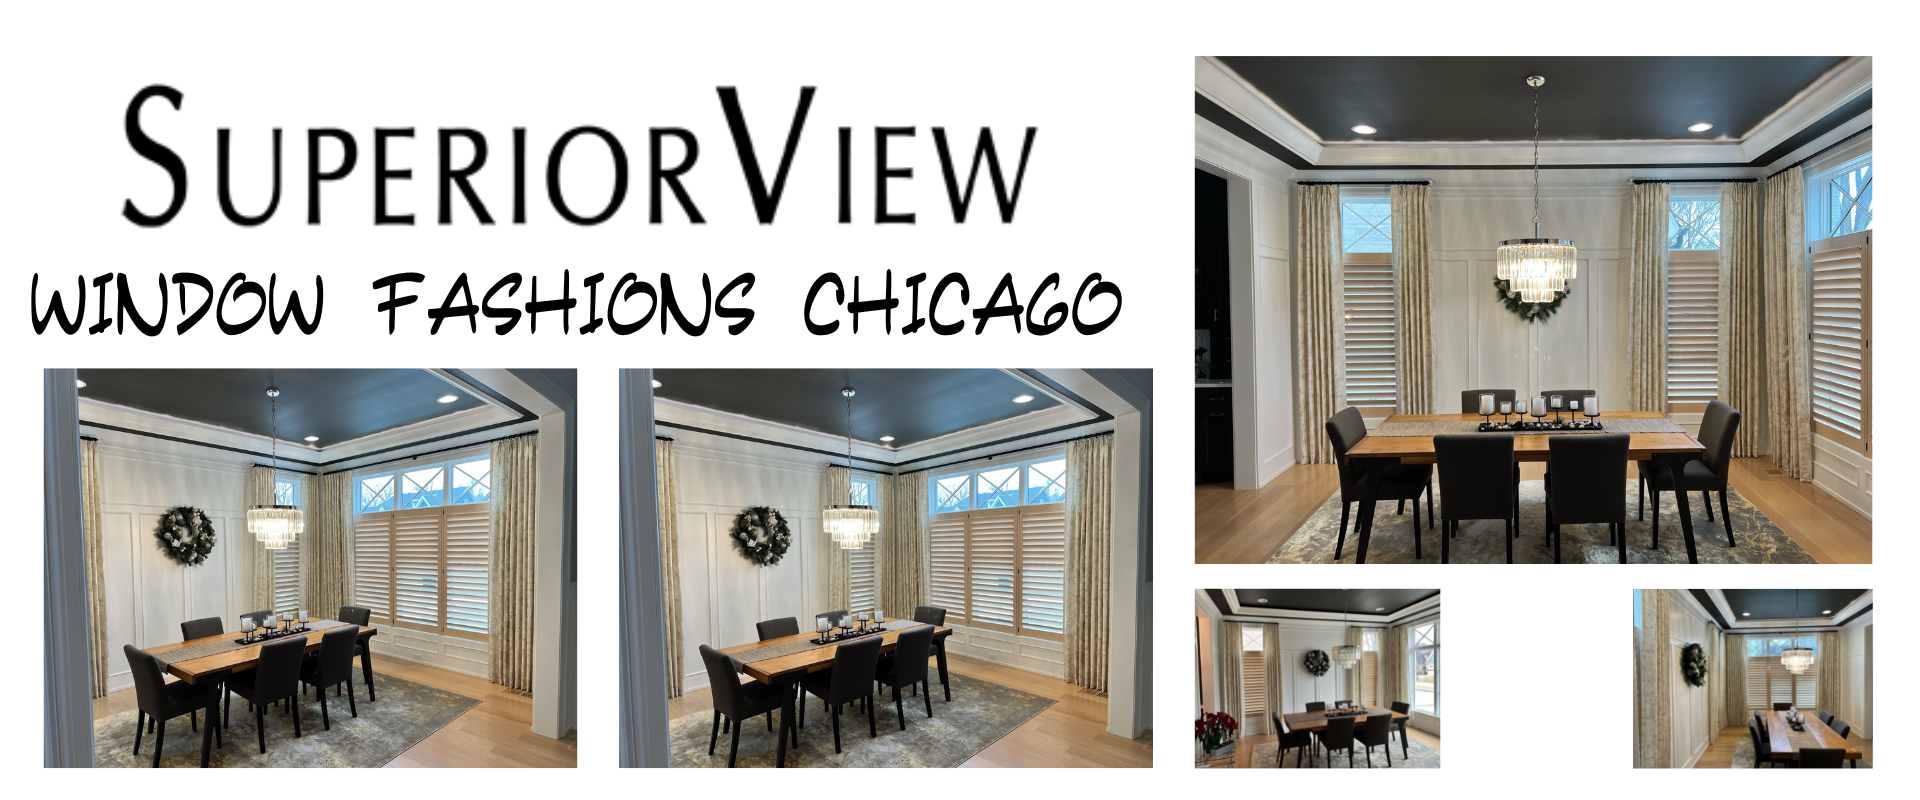 fashion blinds Shades chicagoland area